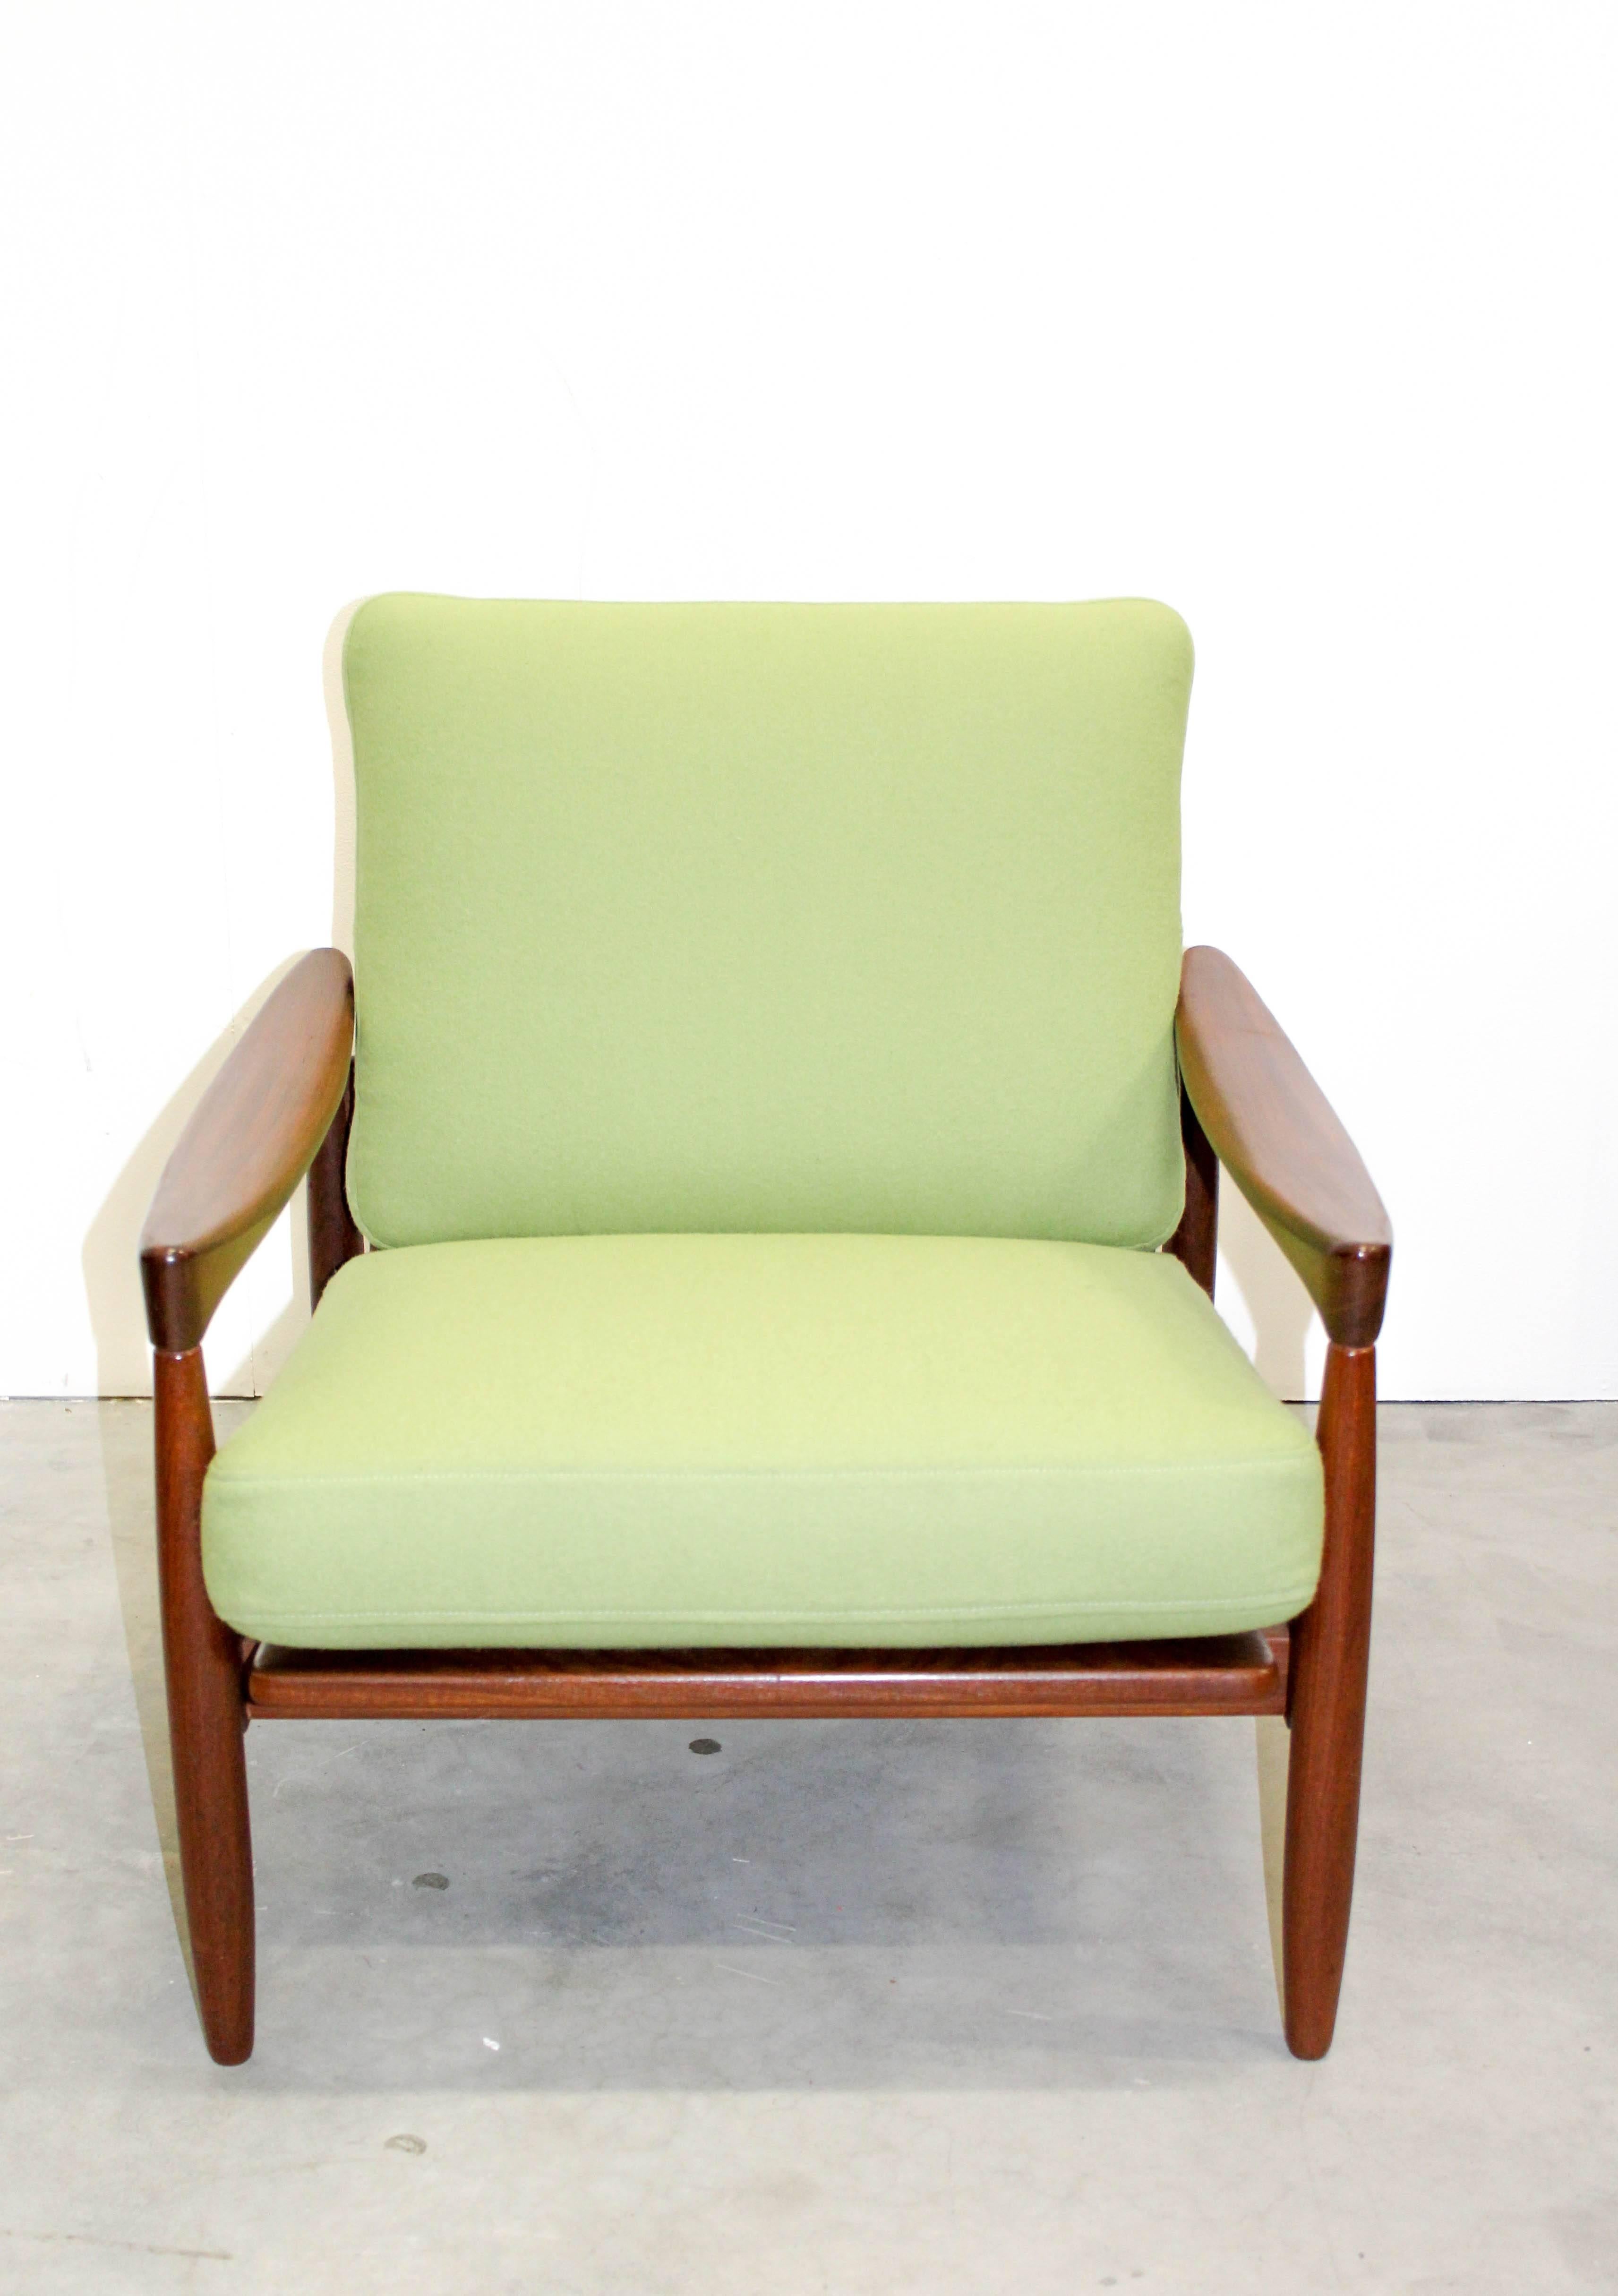 A solid teak lounge chair by Danish designer Erik Wørts. This chair has been professionally upholstered in a lime green wool fabric (100% wool from Klippan Yllefabrik). The chair is in excellent vintage condition and reupholstered. 

